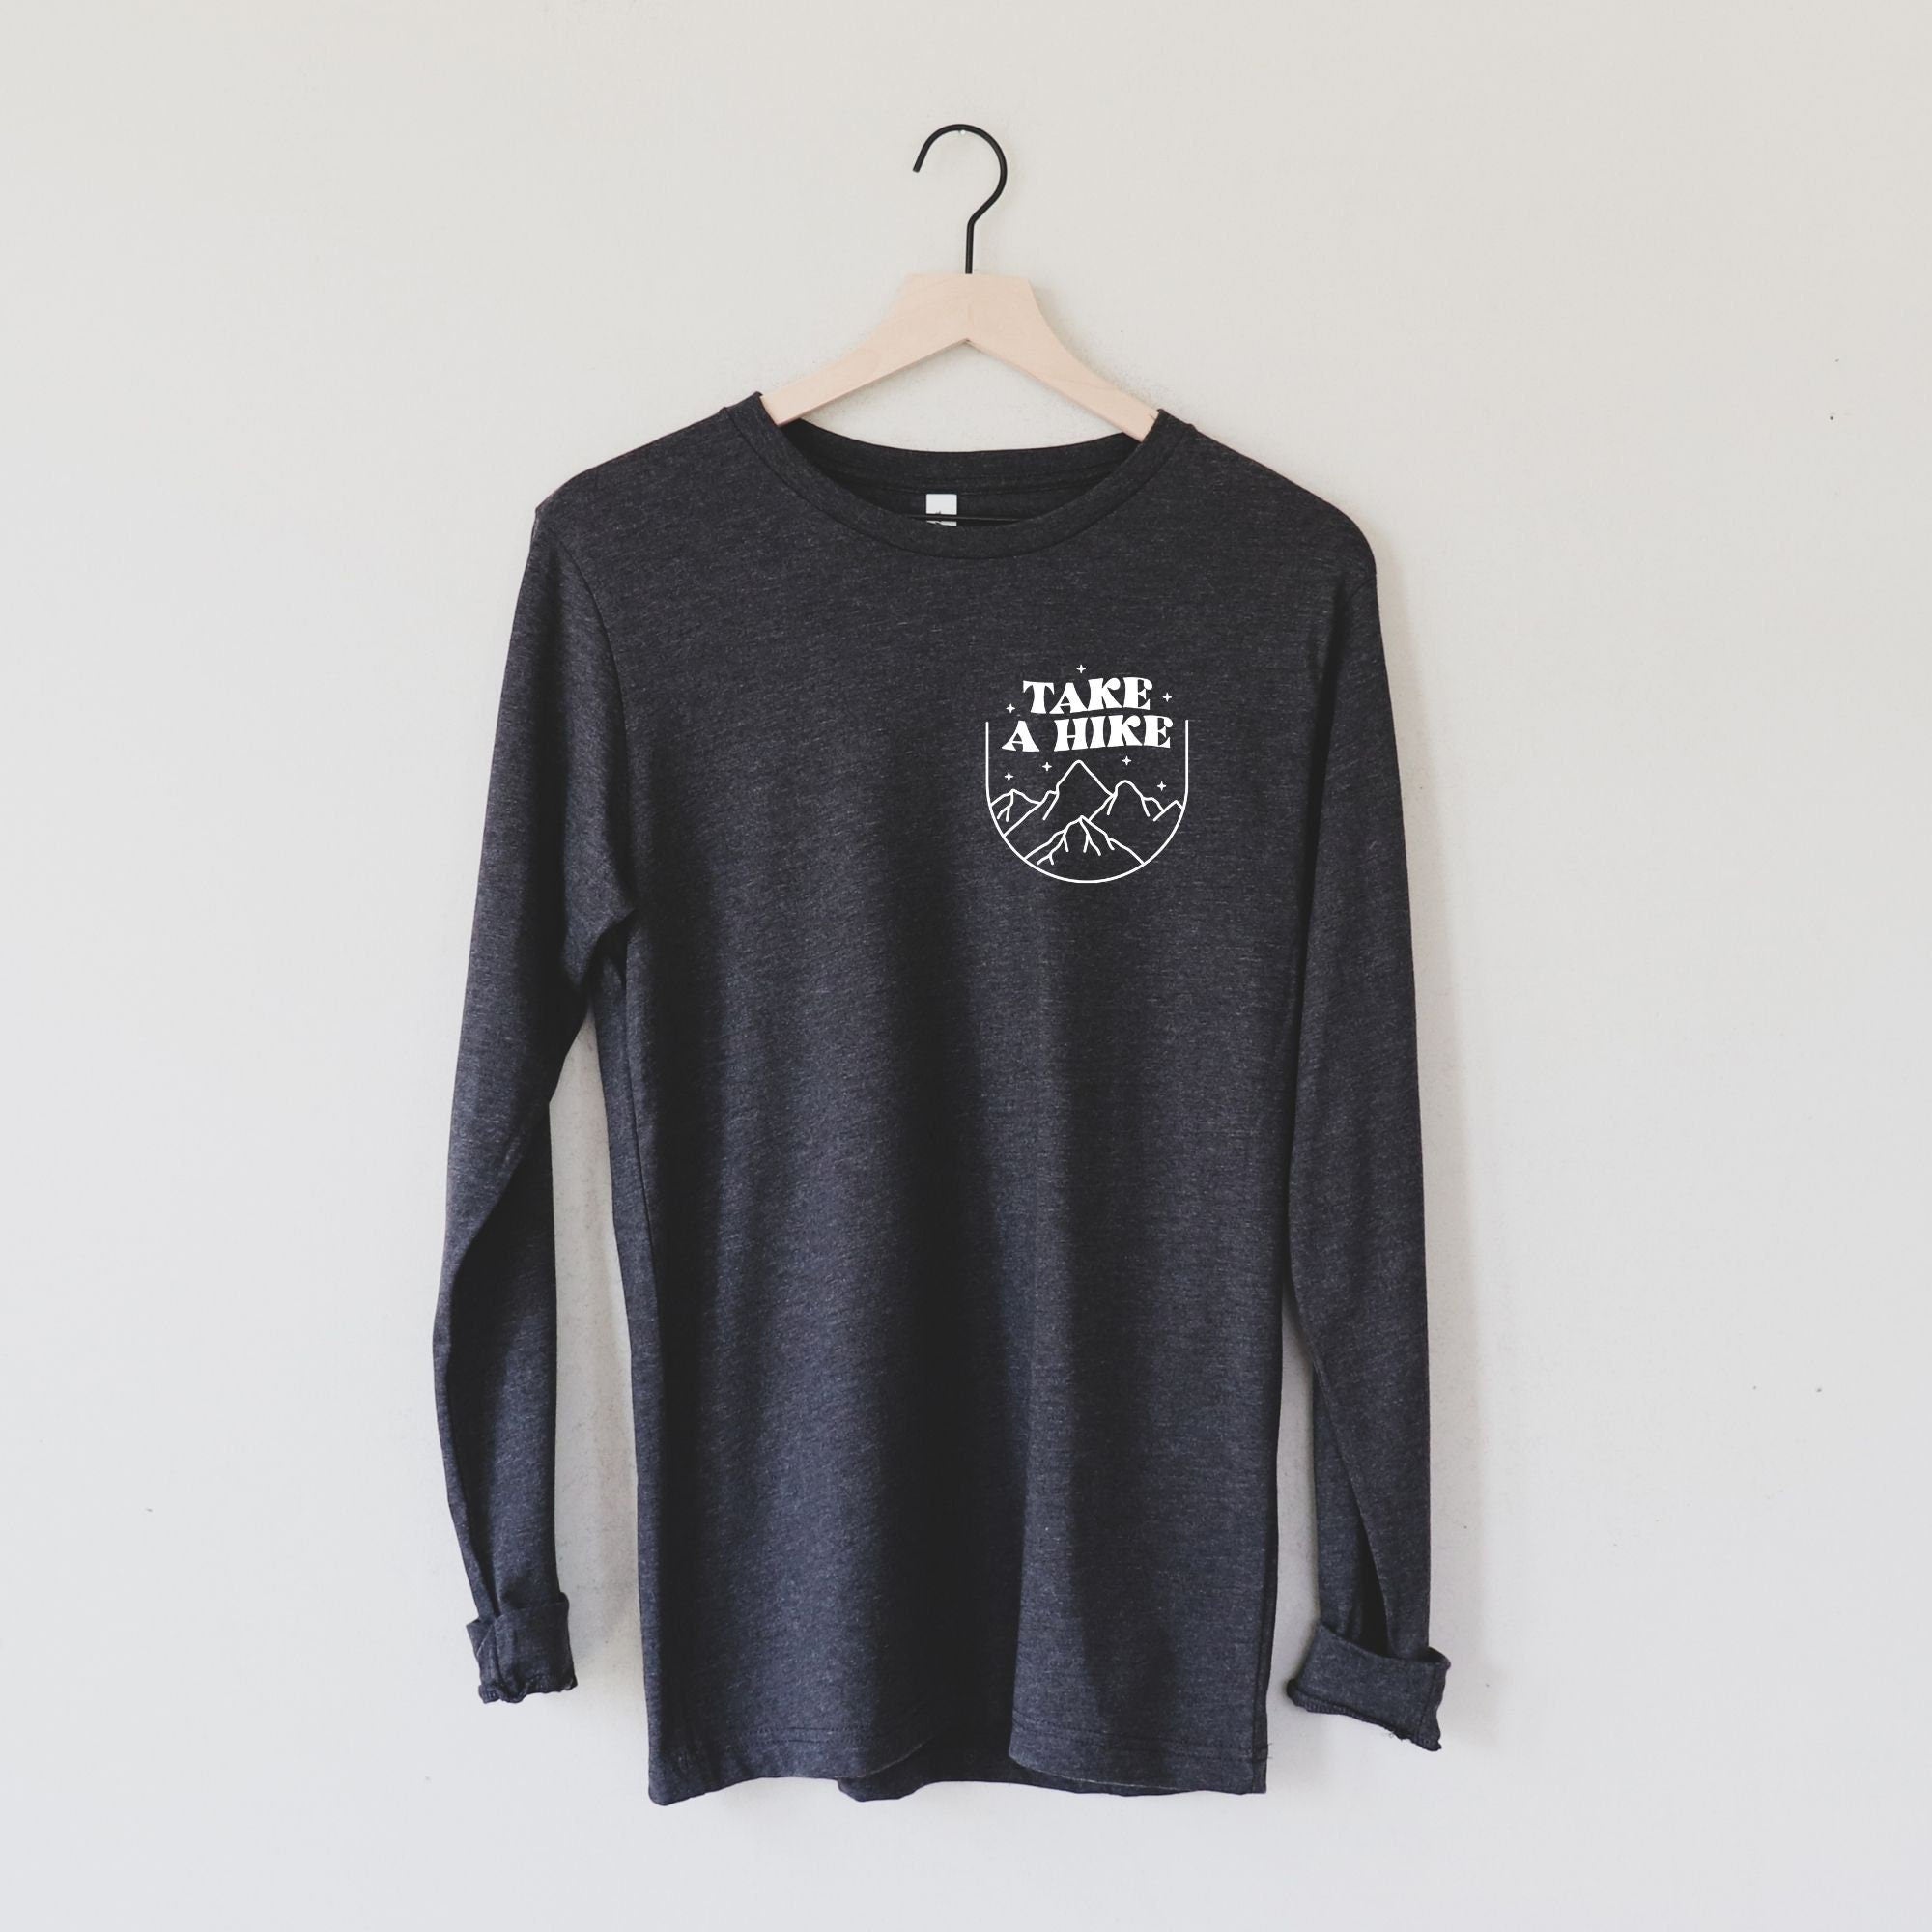 Take A Hike Long Sleeve Shirt, Hiking Shirt, Cute Nature Shirts, Get Outdoors and Explore More, Mountain Adventure, Casual Wanderlust *UNISEX FIT*-Long Sleeves-208 Tees Wholesale, Idaho